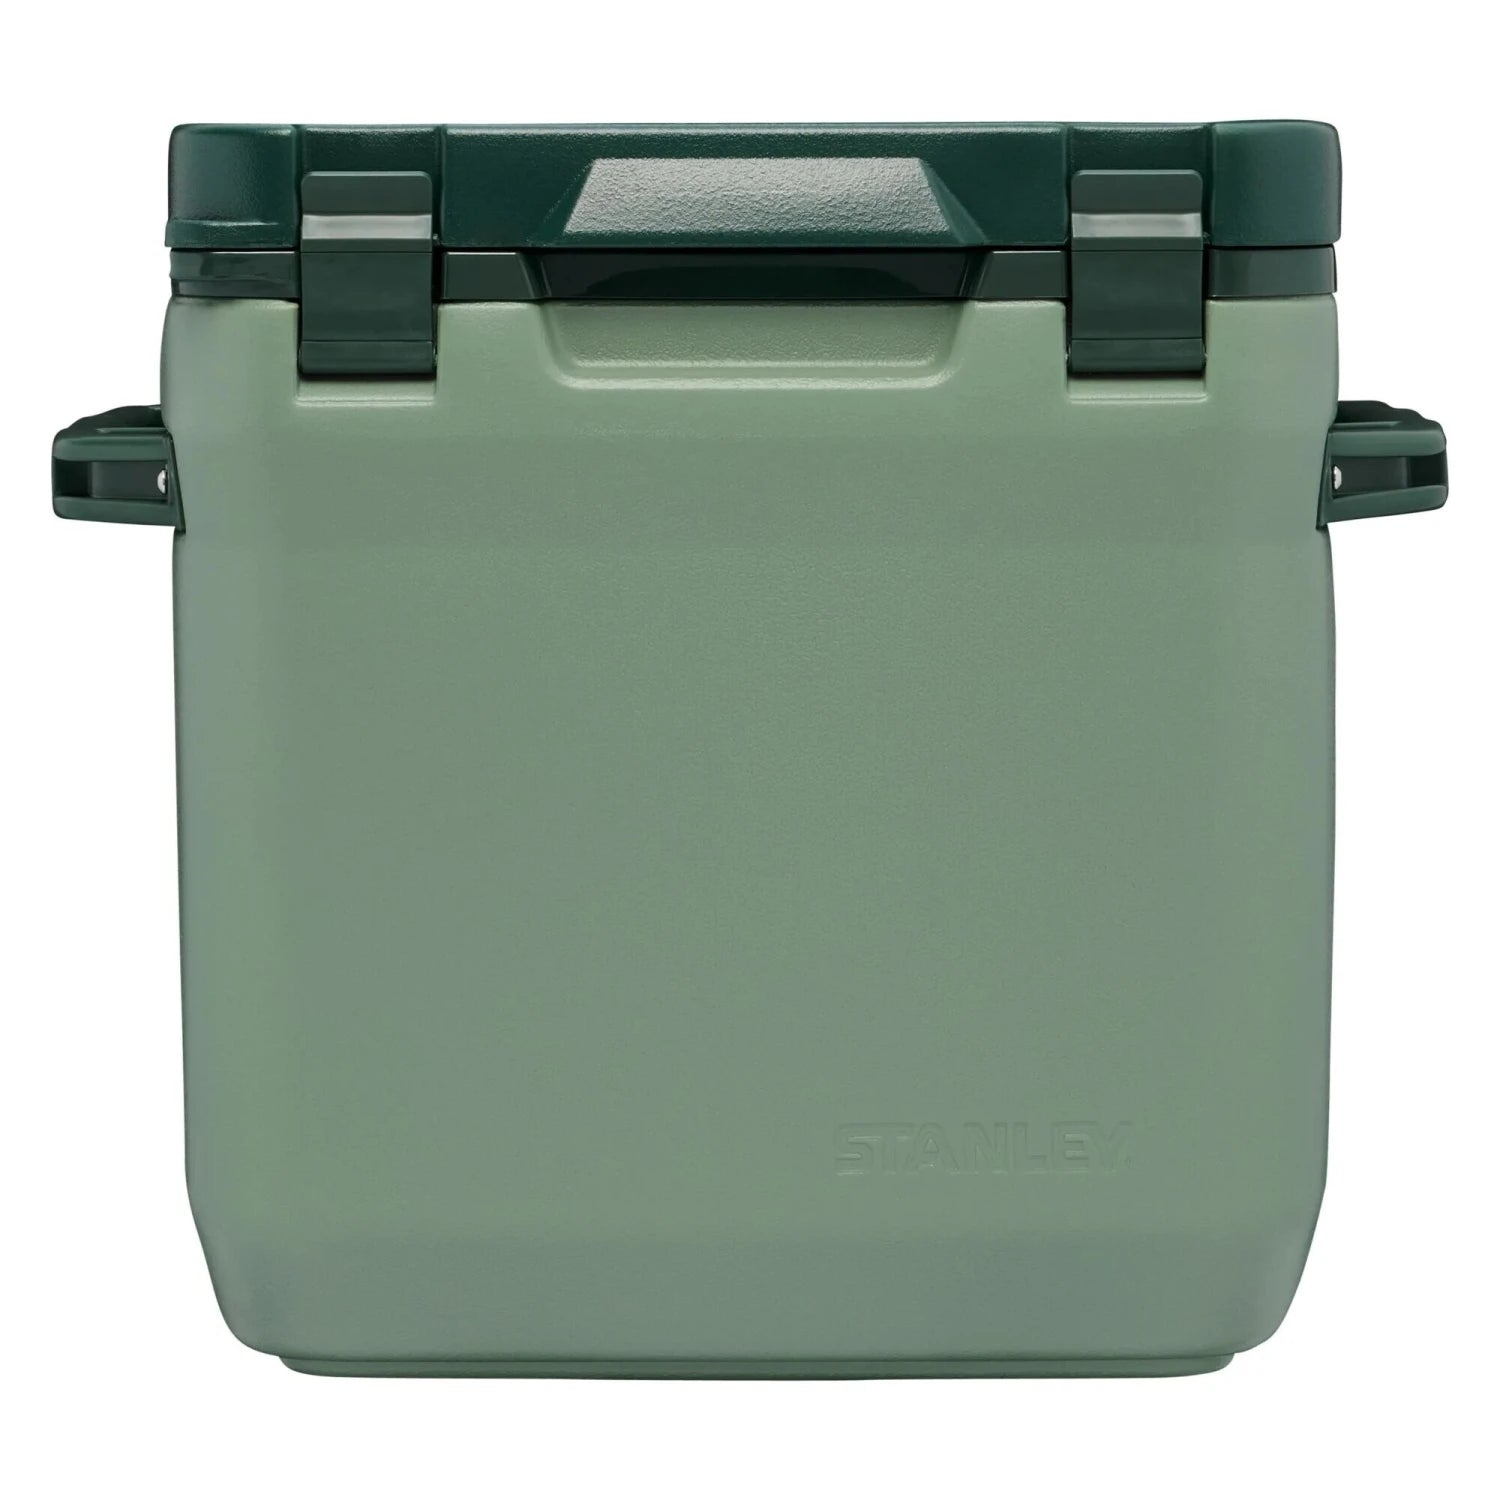 Stanley Adventure Cold For Days Outdoor Cooler - 30QT, Stanley Green, front view 